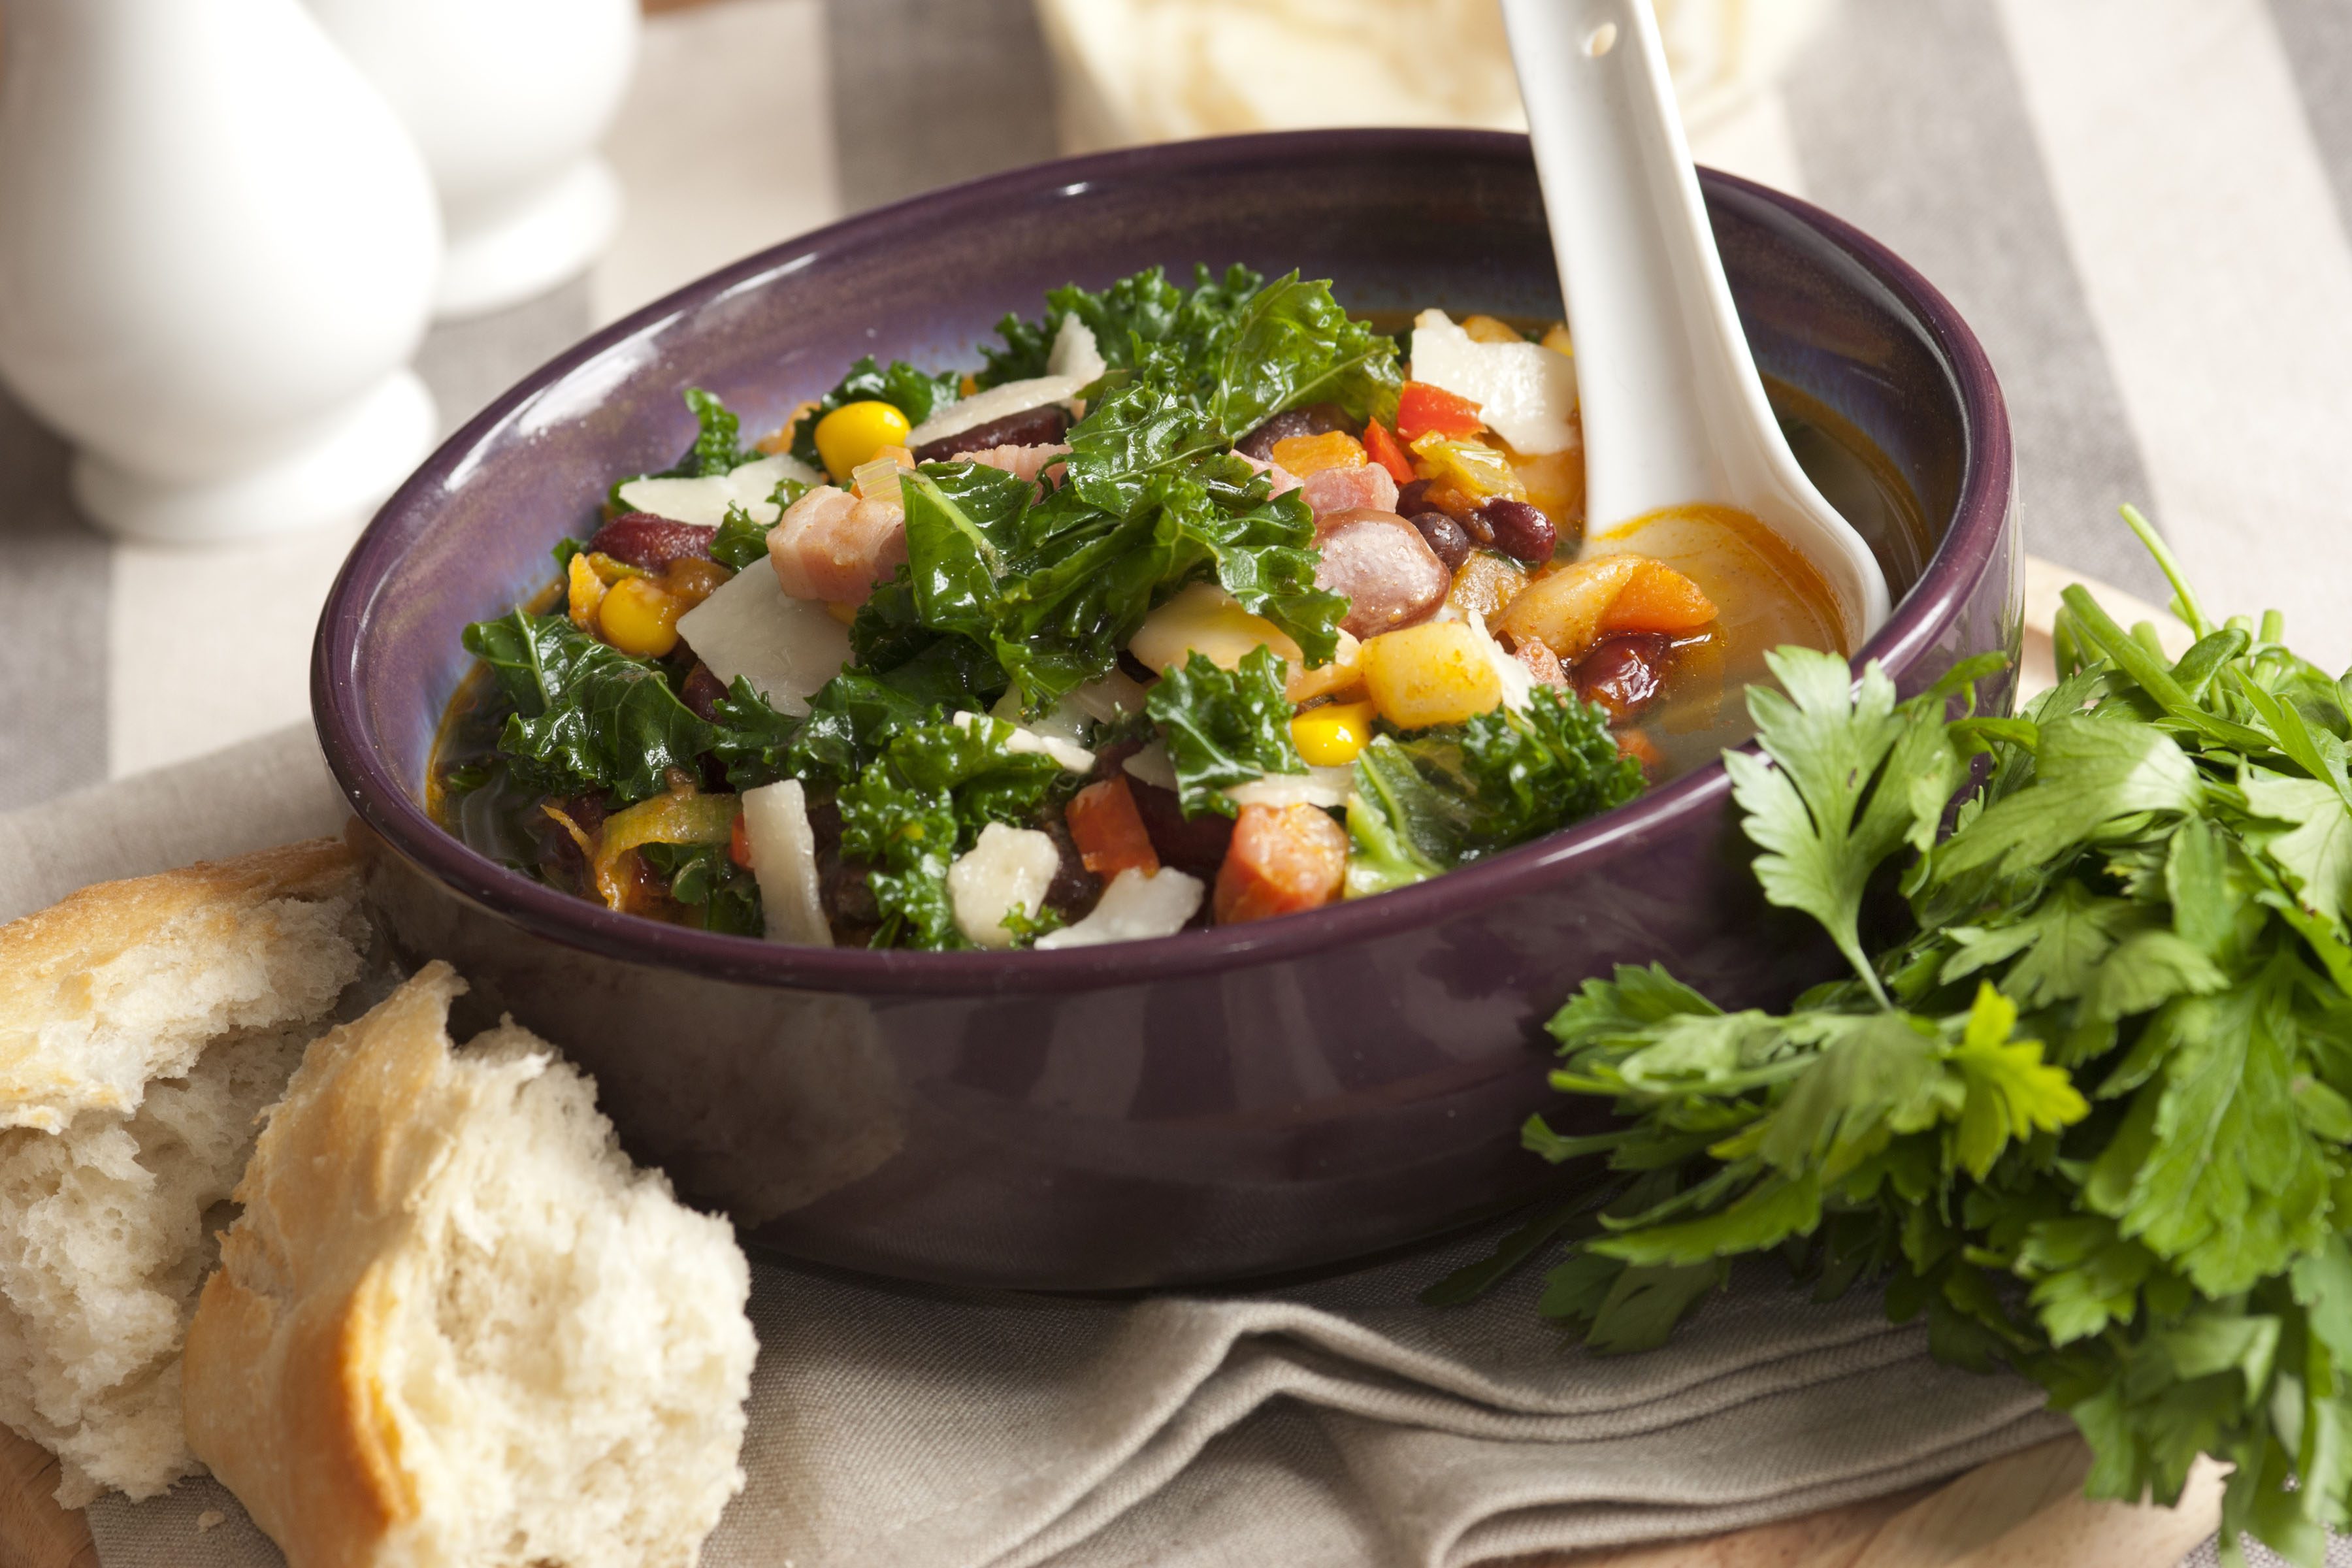 Kale and Chicken Soup